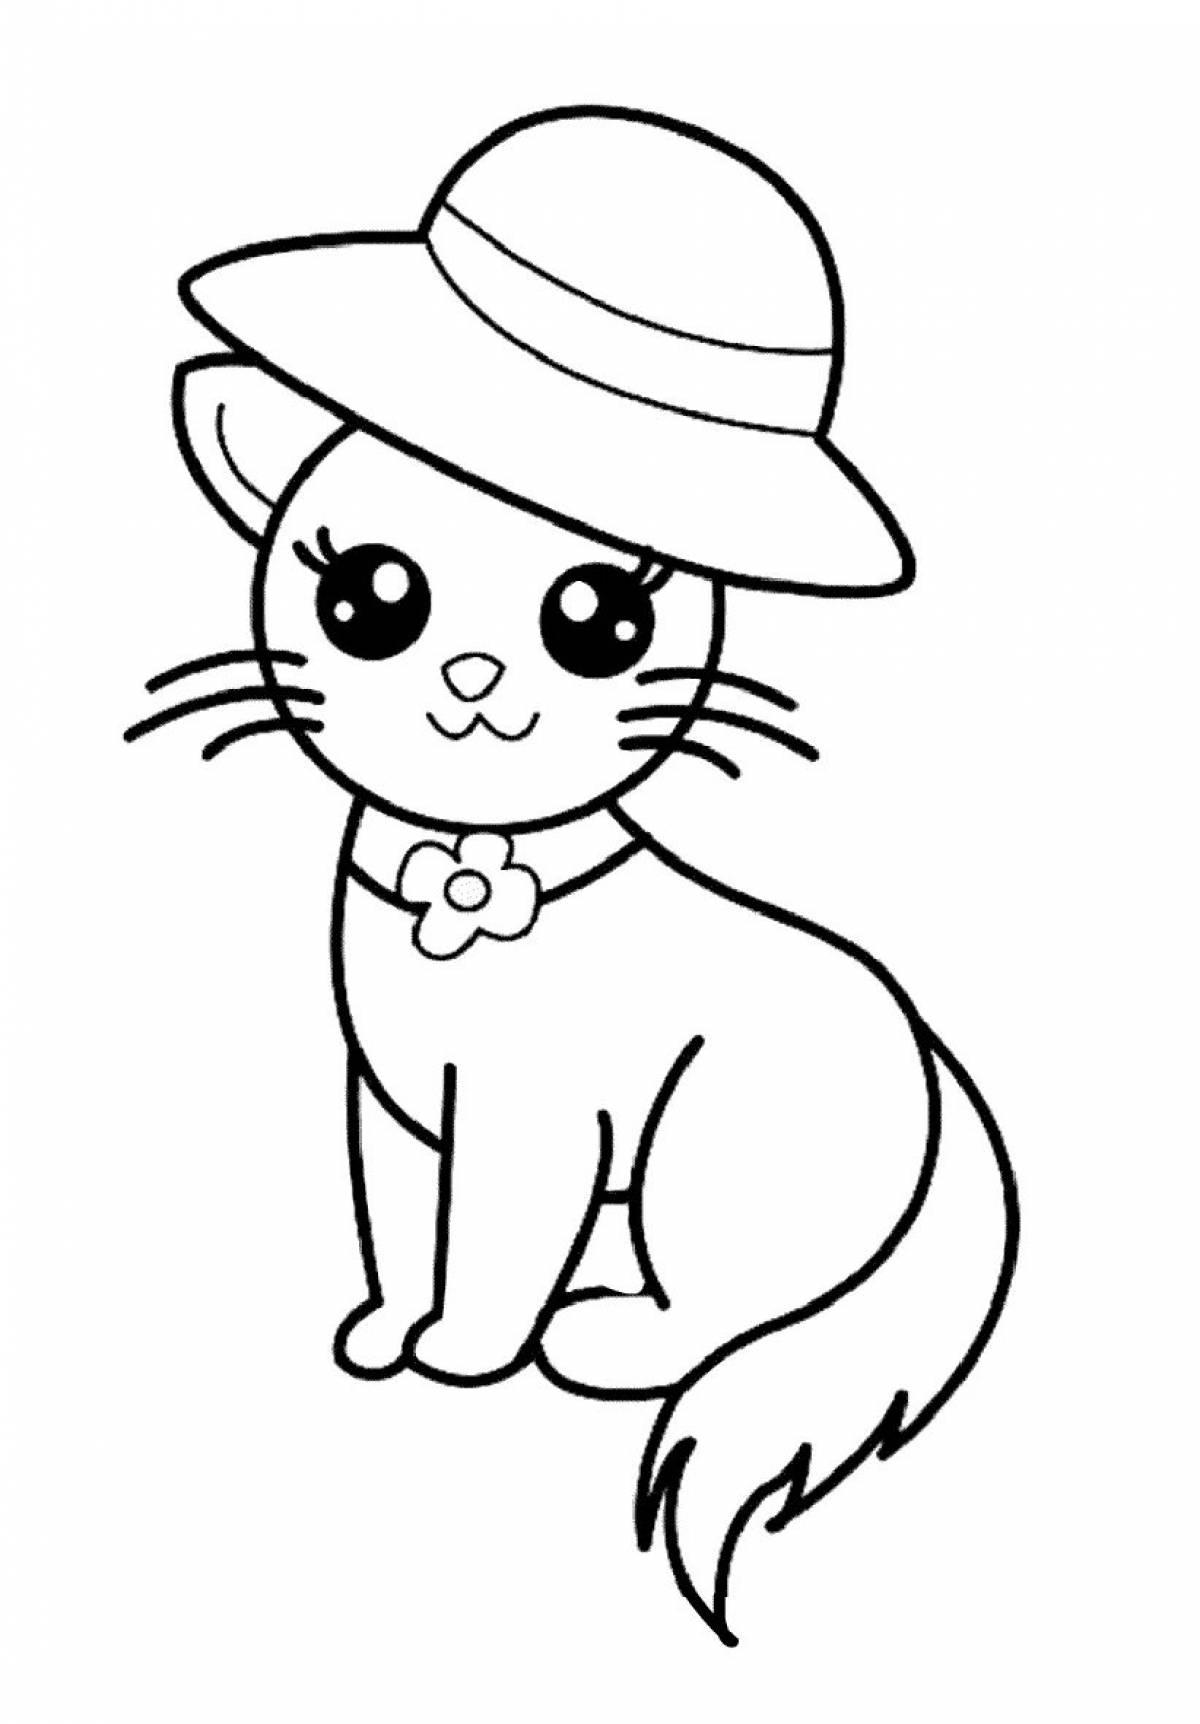 Coloring book witty cat in a hat